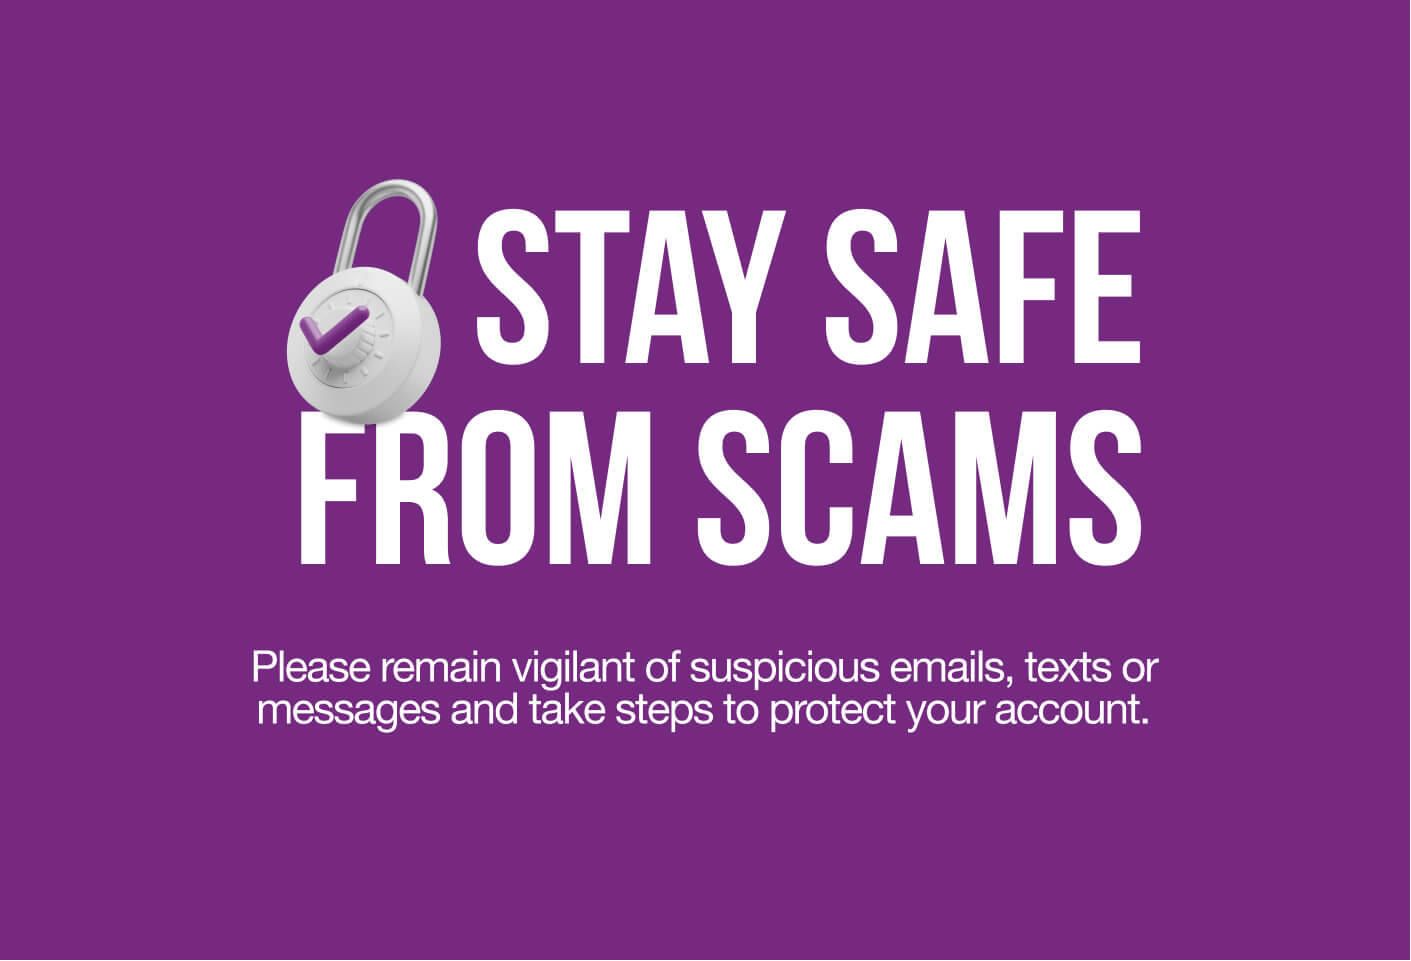 Stay safe from scams bannner